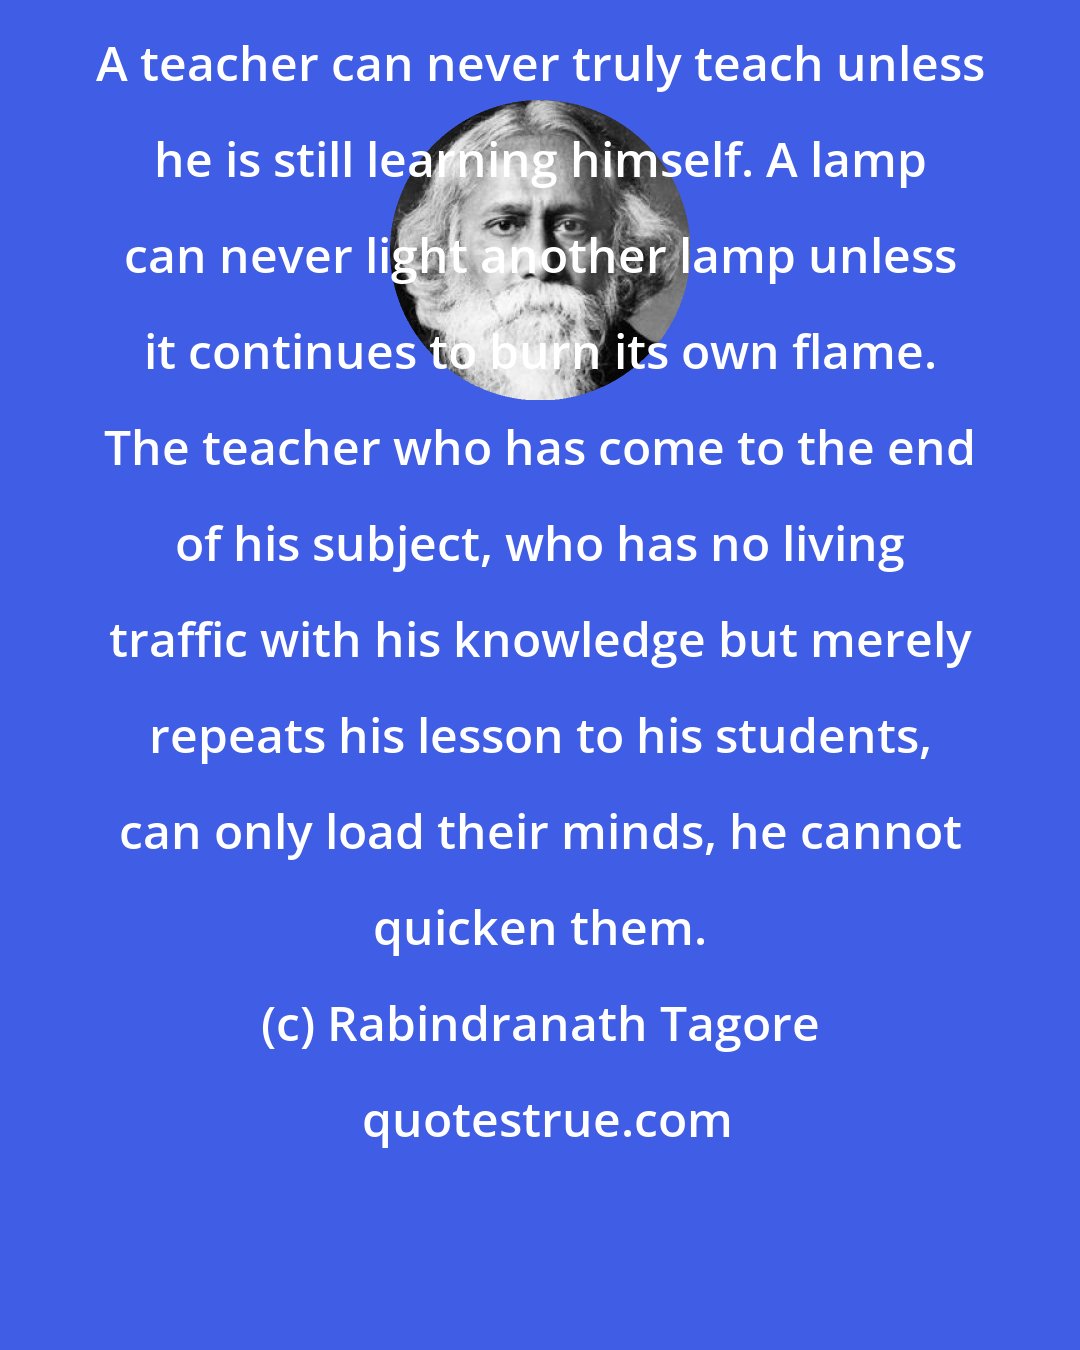 Rabindranath Tagore: A teacher can never truly teach unless he is still learning himself. A lamp can never light another lamp unless it continues to burn its own flame. The teacher who has come to the end of his subject, who has no living traffic with his knowledge but merely repeats his lesson to his students, can only load their minds, he cannot quicken them.